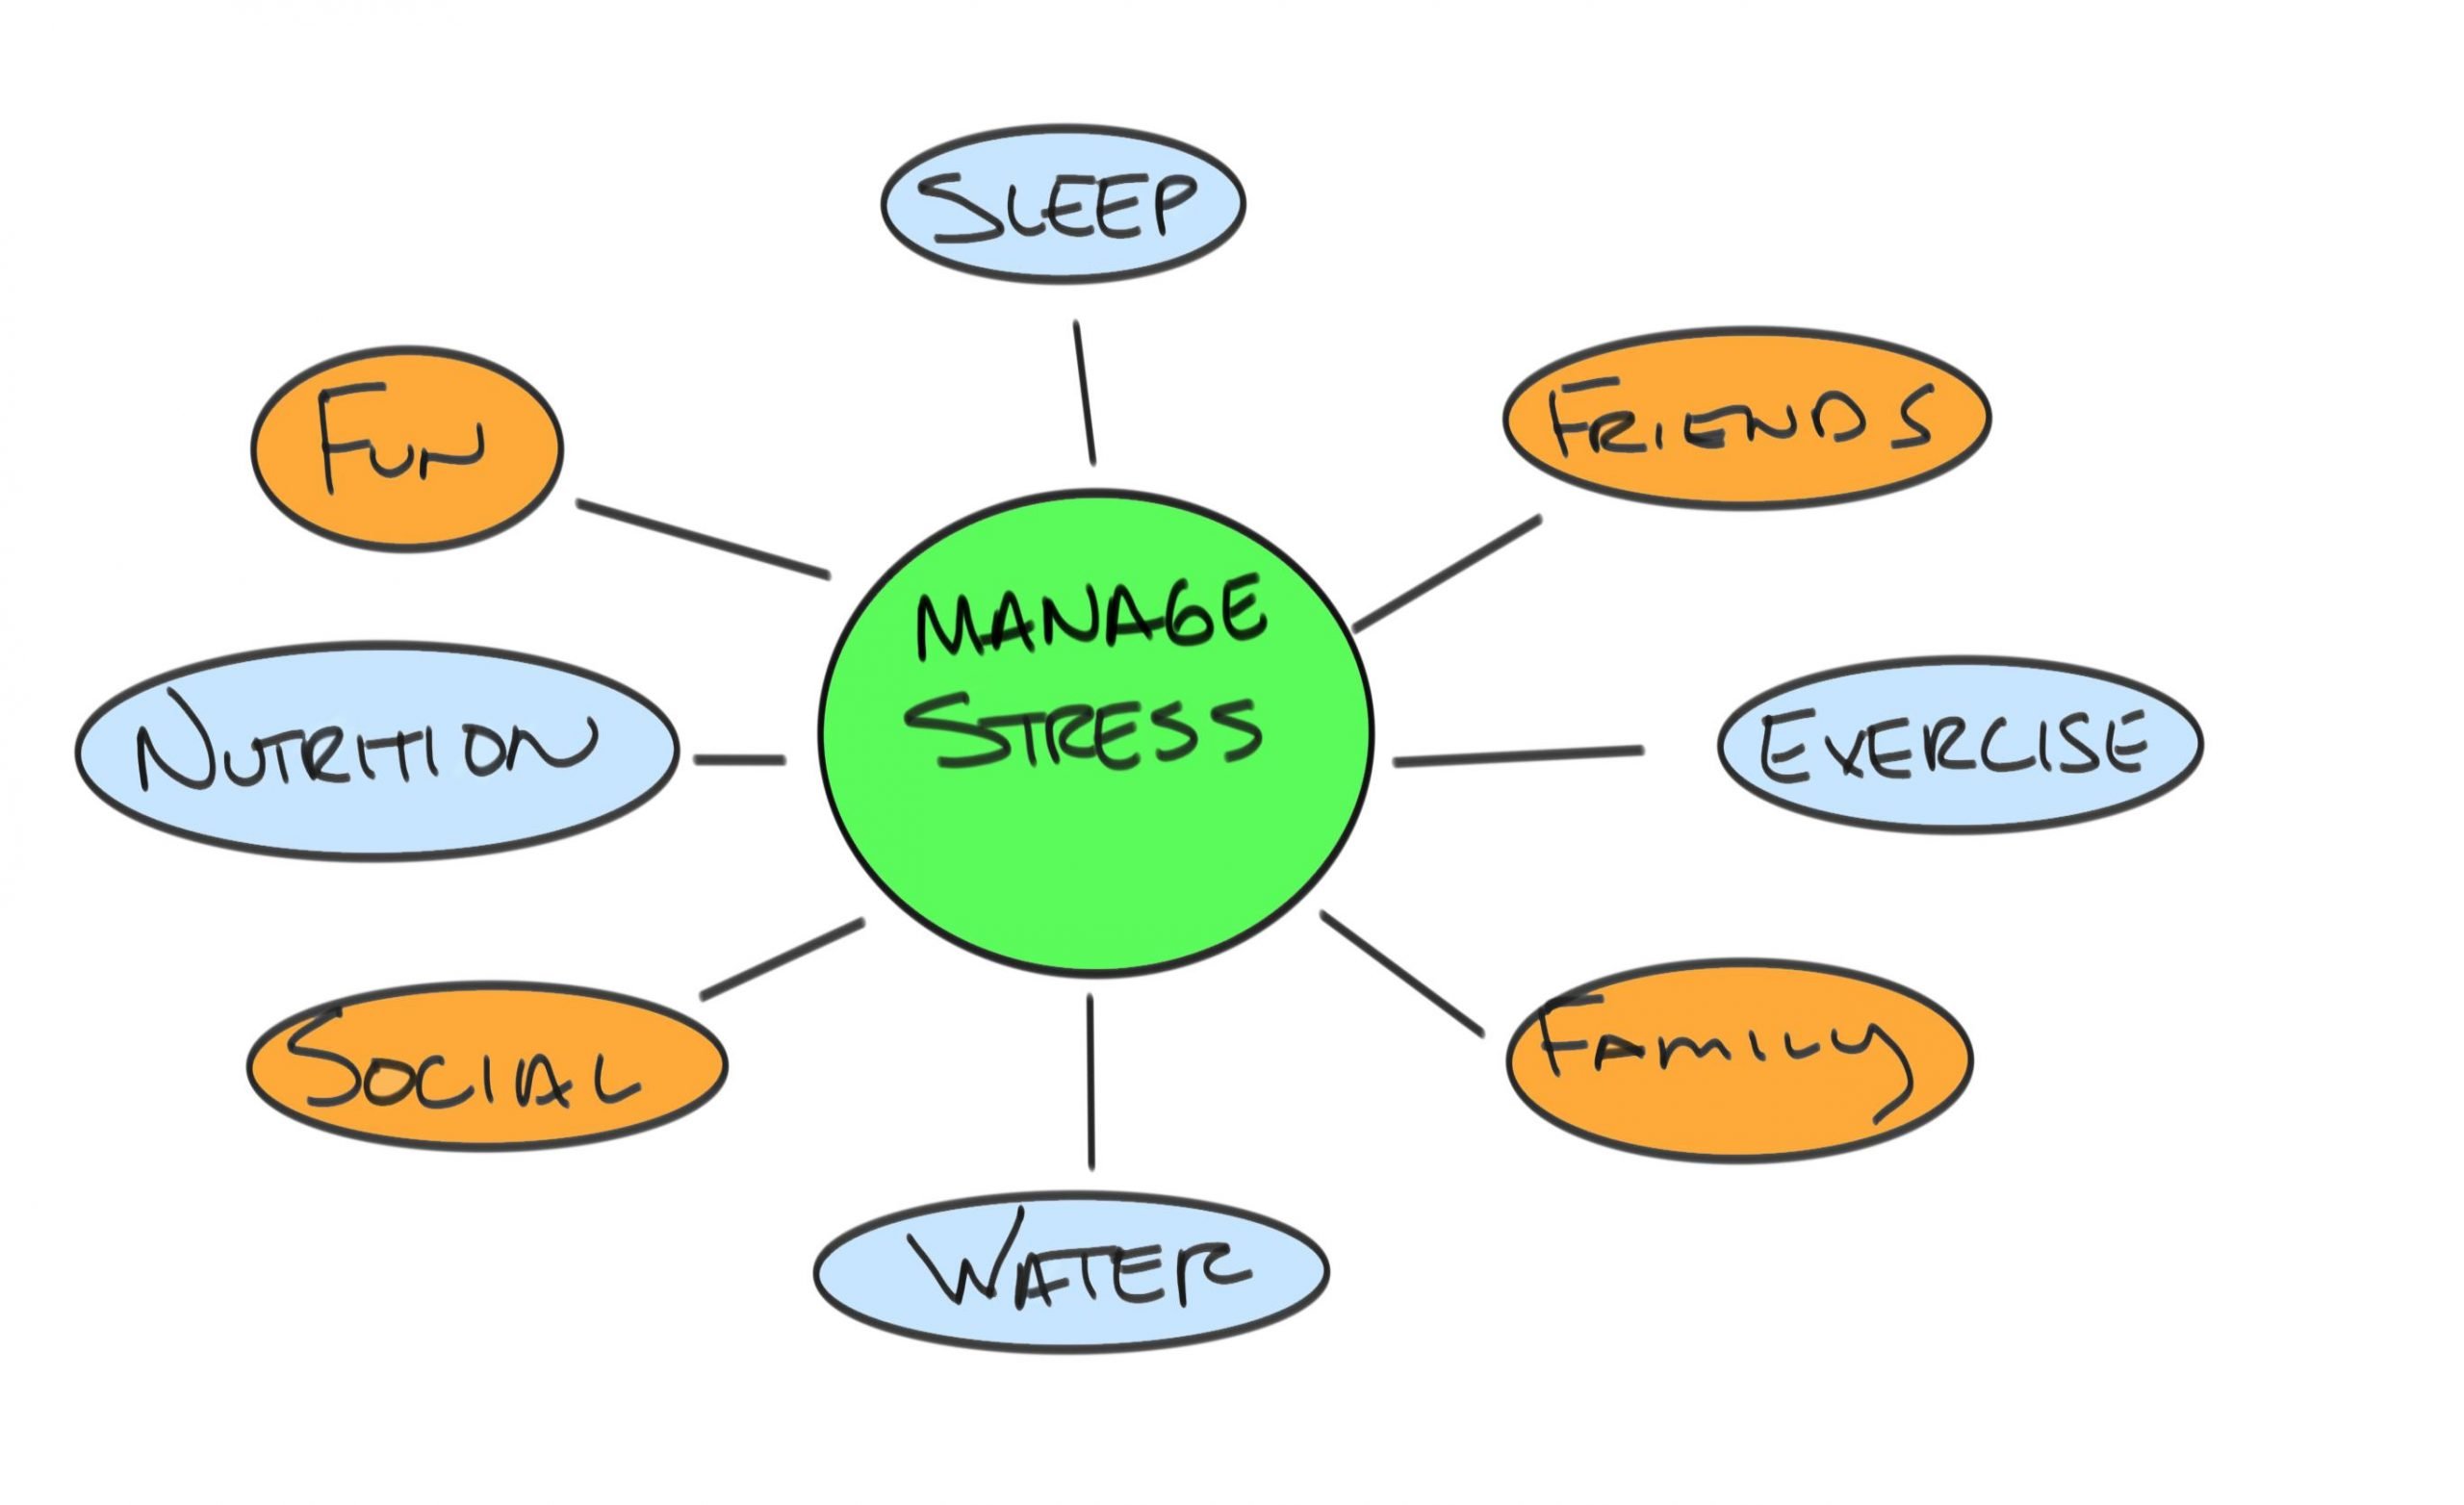 Fun, sleep, friends, exercise, family, water, social and nutrition are all ways to manage stress.